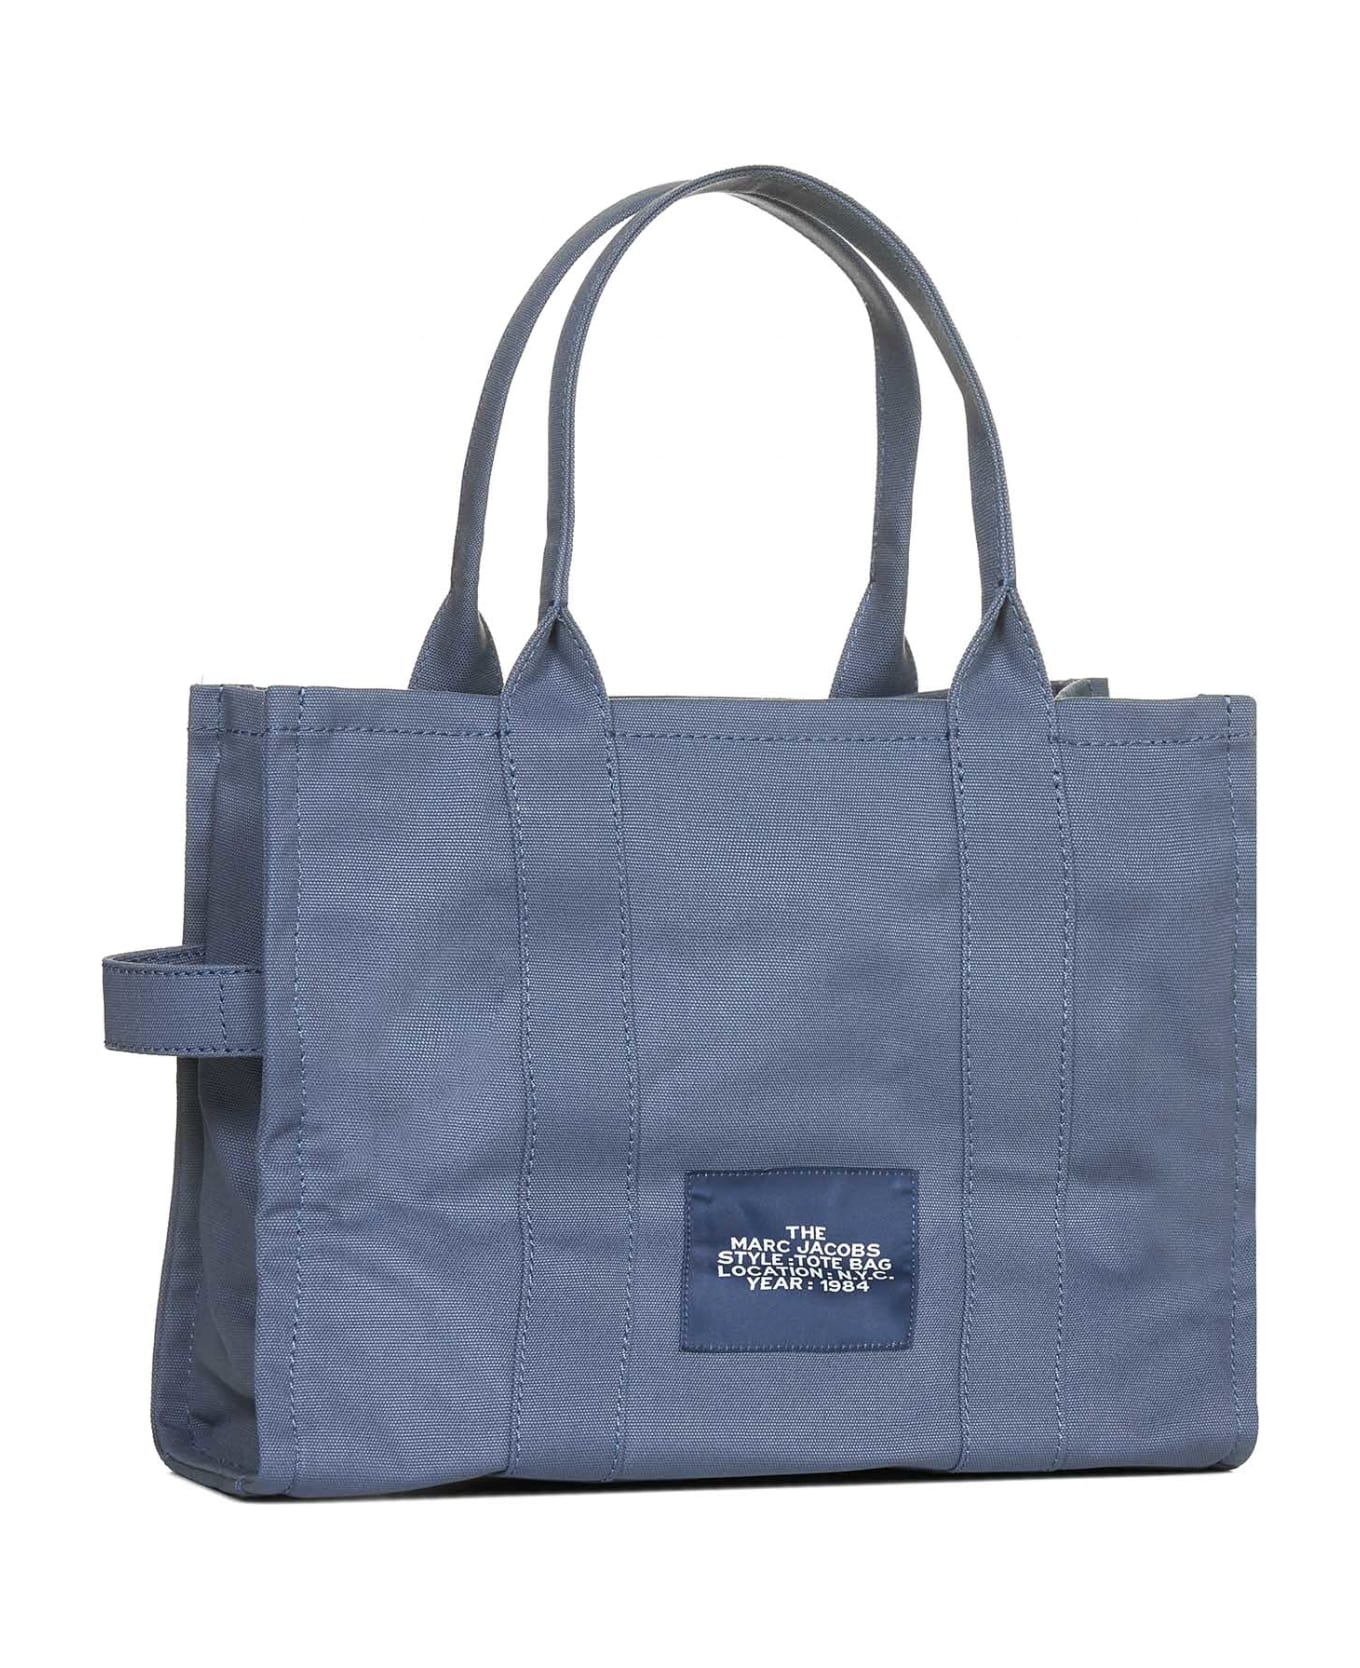 Marc Jacobs Tote - Blue shadow